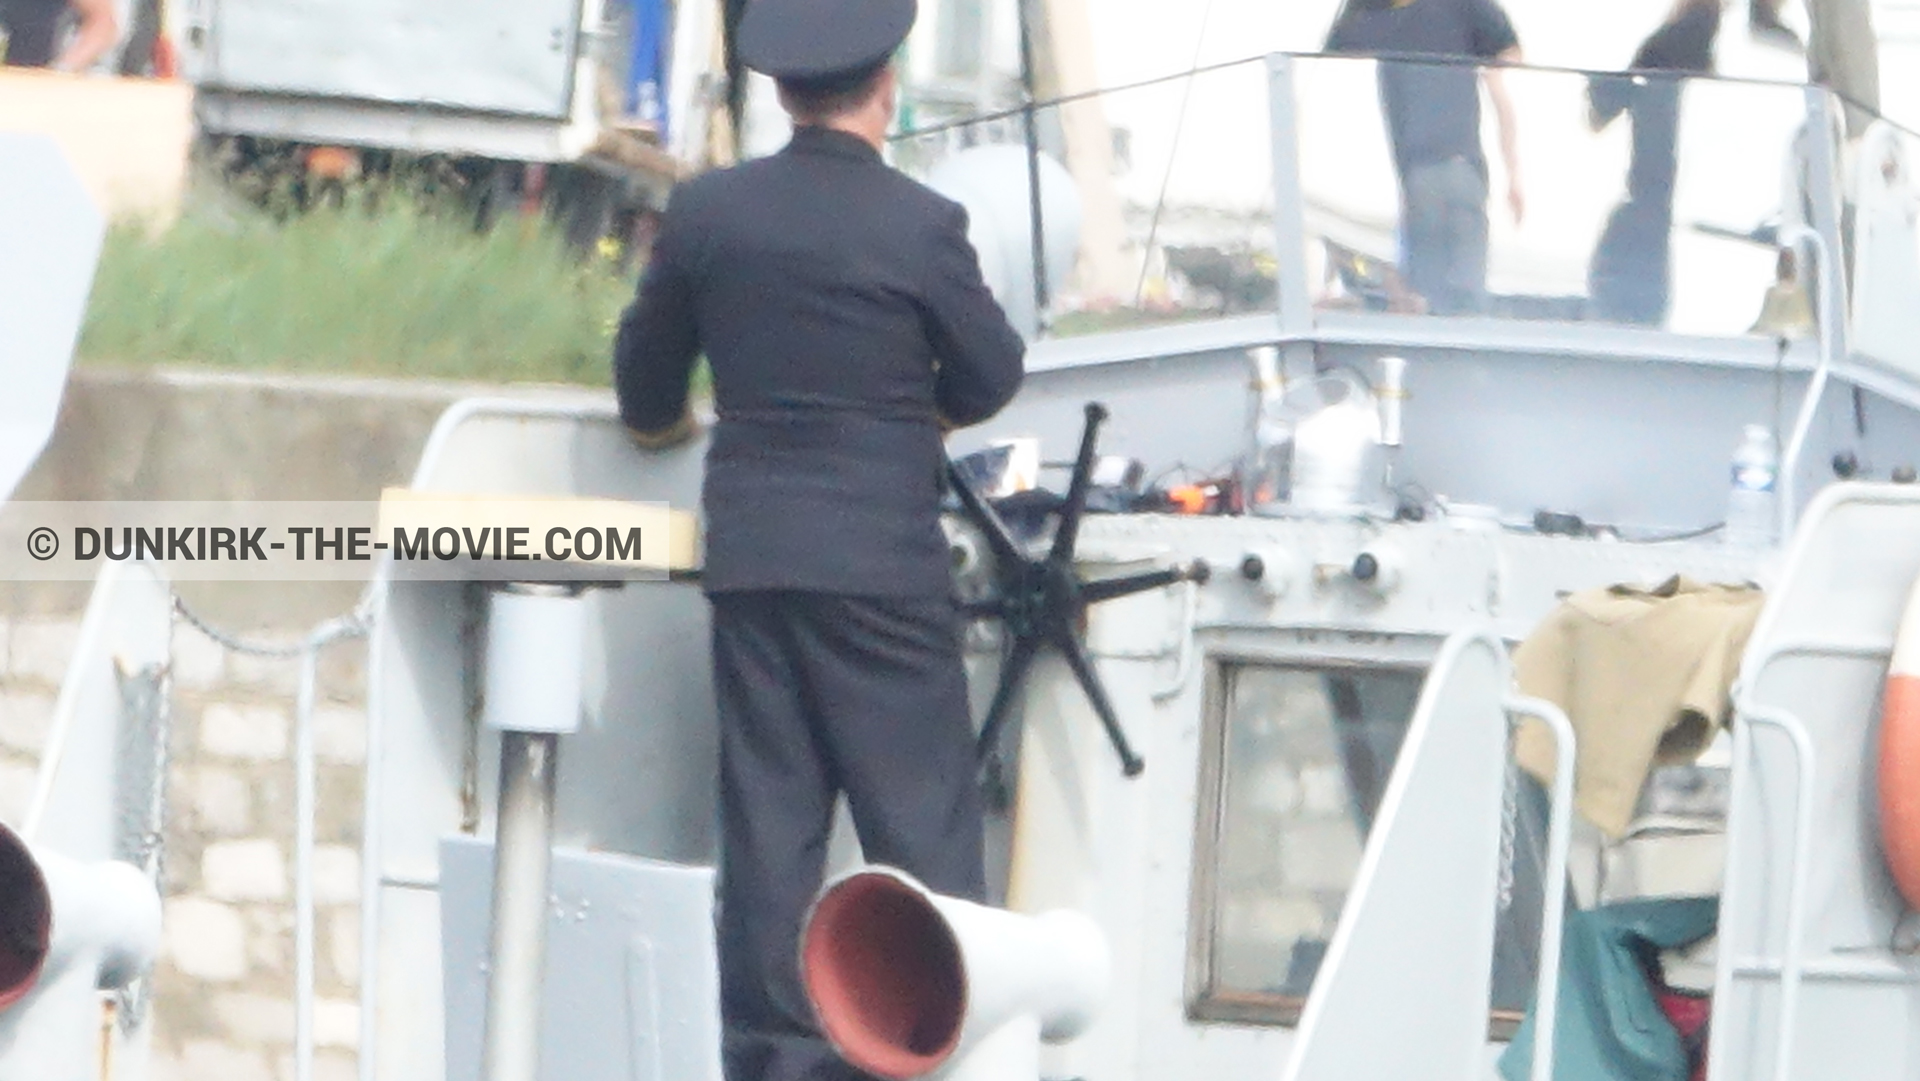 Picture with boat, supernumeraries,  from behind the scene of the Dunkirk movie by Nolan